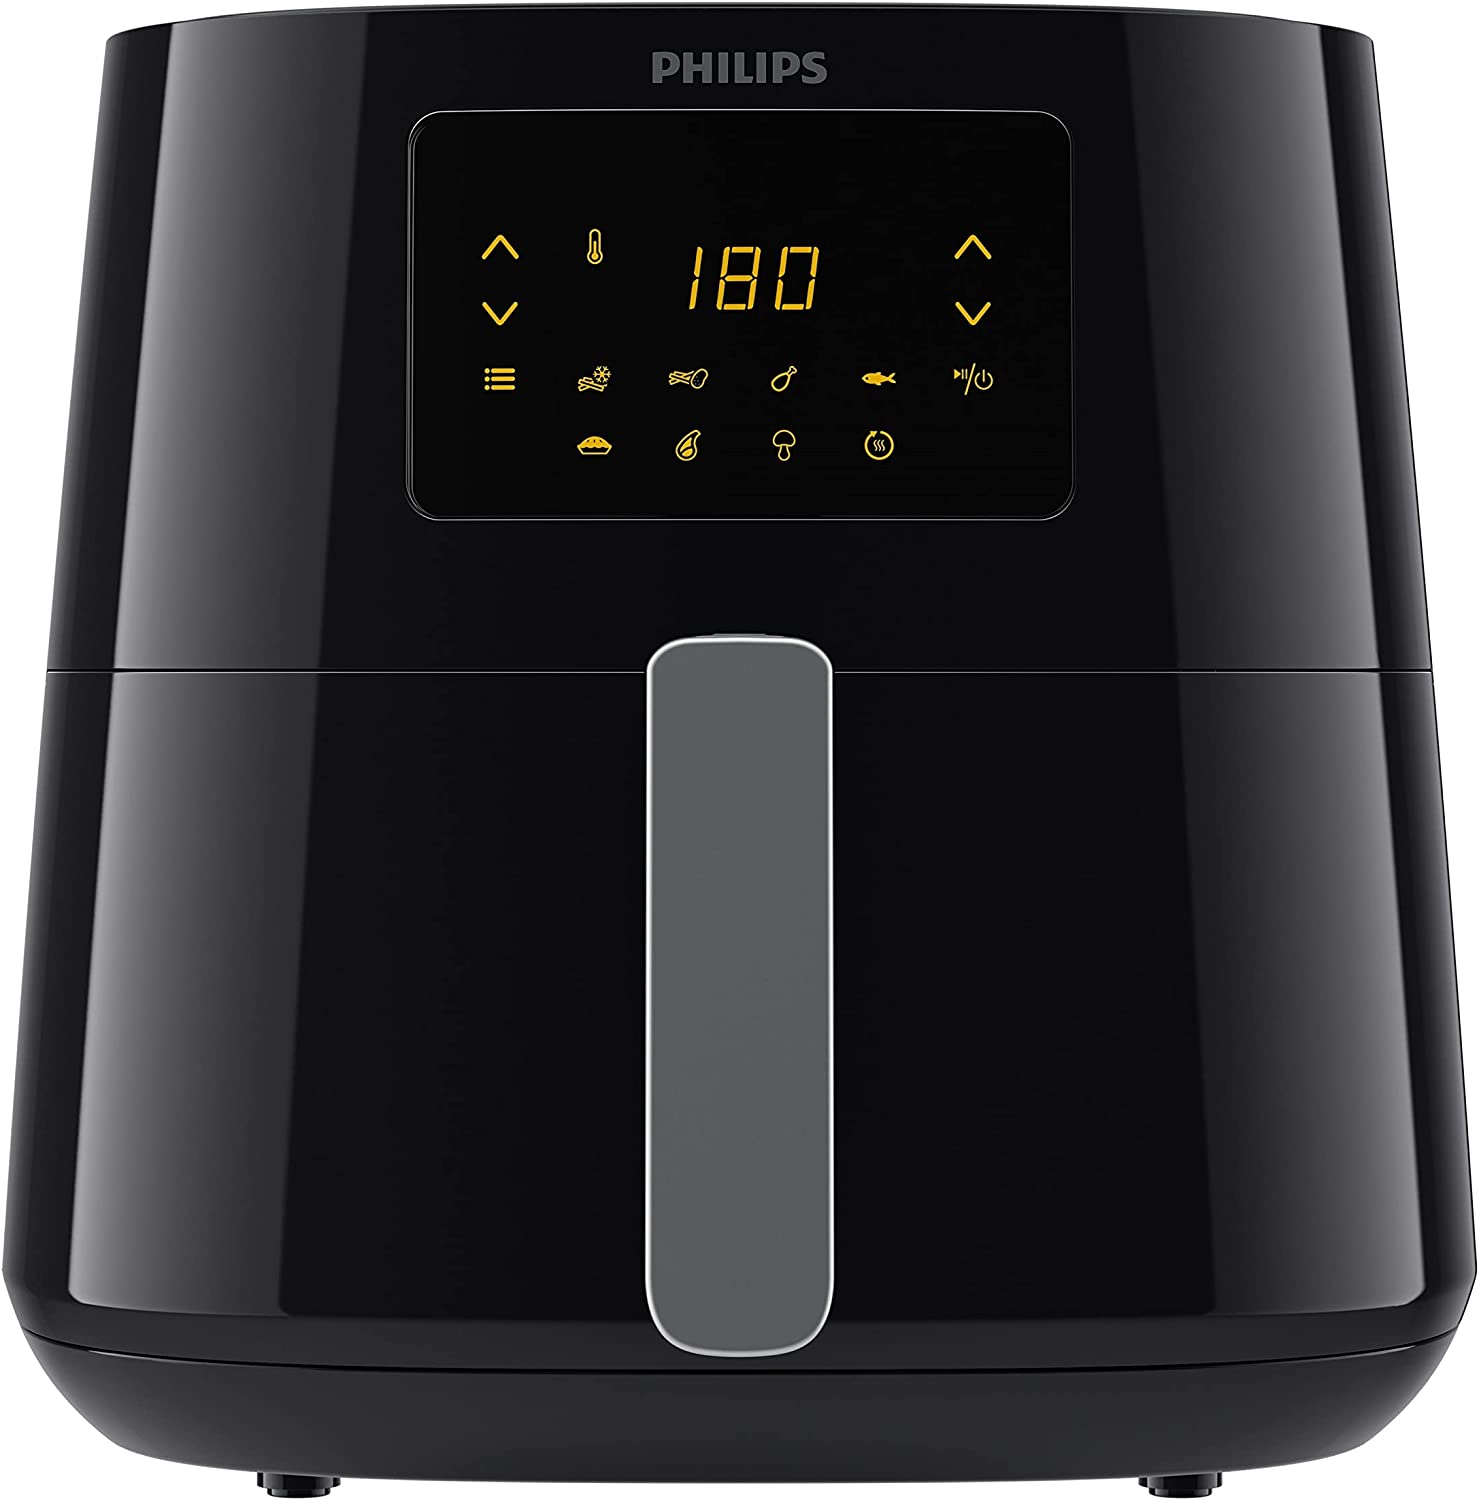 Philips Airfryer 3000 Serie XL vs Cecofry Experience Window 6000 vs Cosori CP158-AF vs Xiaomi Mi Smart Air Fryer Pro